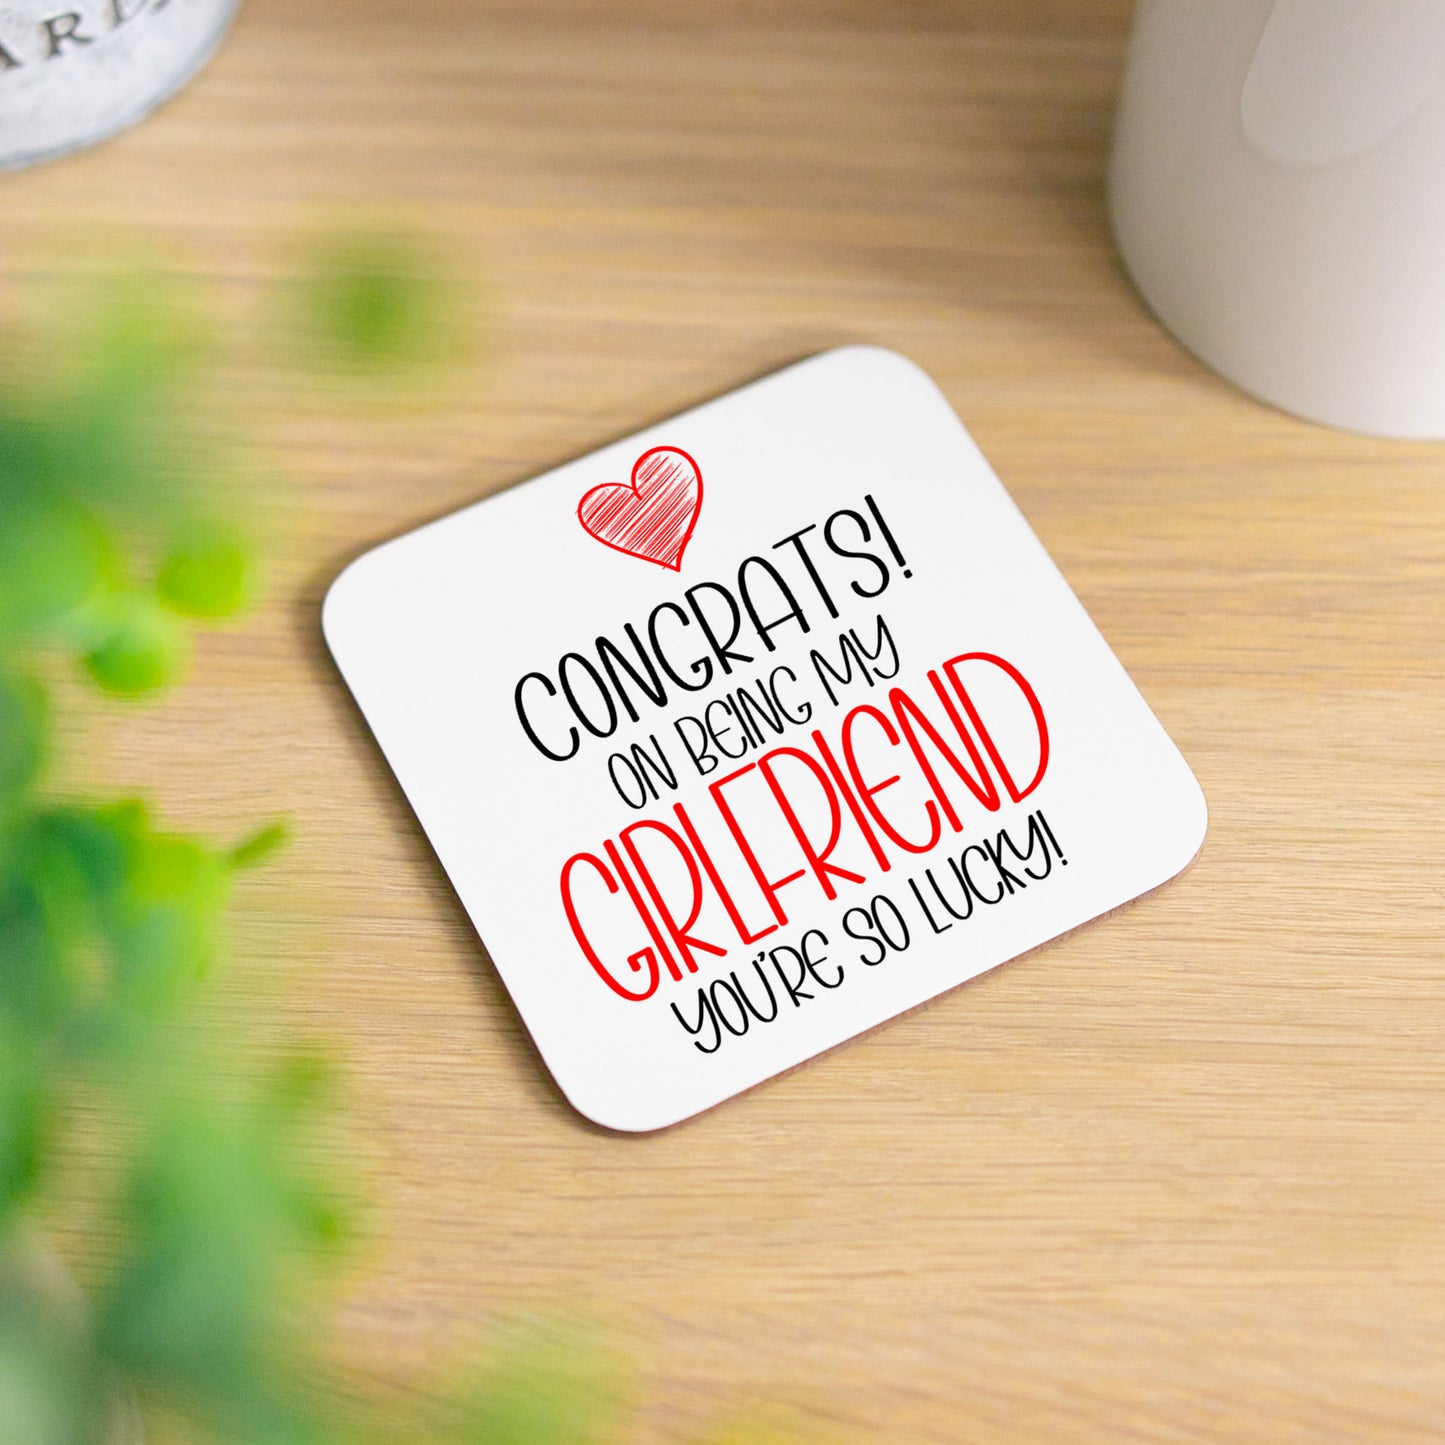 Congrats On Being My Girlfriend Mug and/or Coaster Gift  - Always Looking Good - So Lucky Coaster On Its Own  